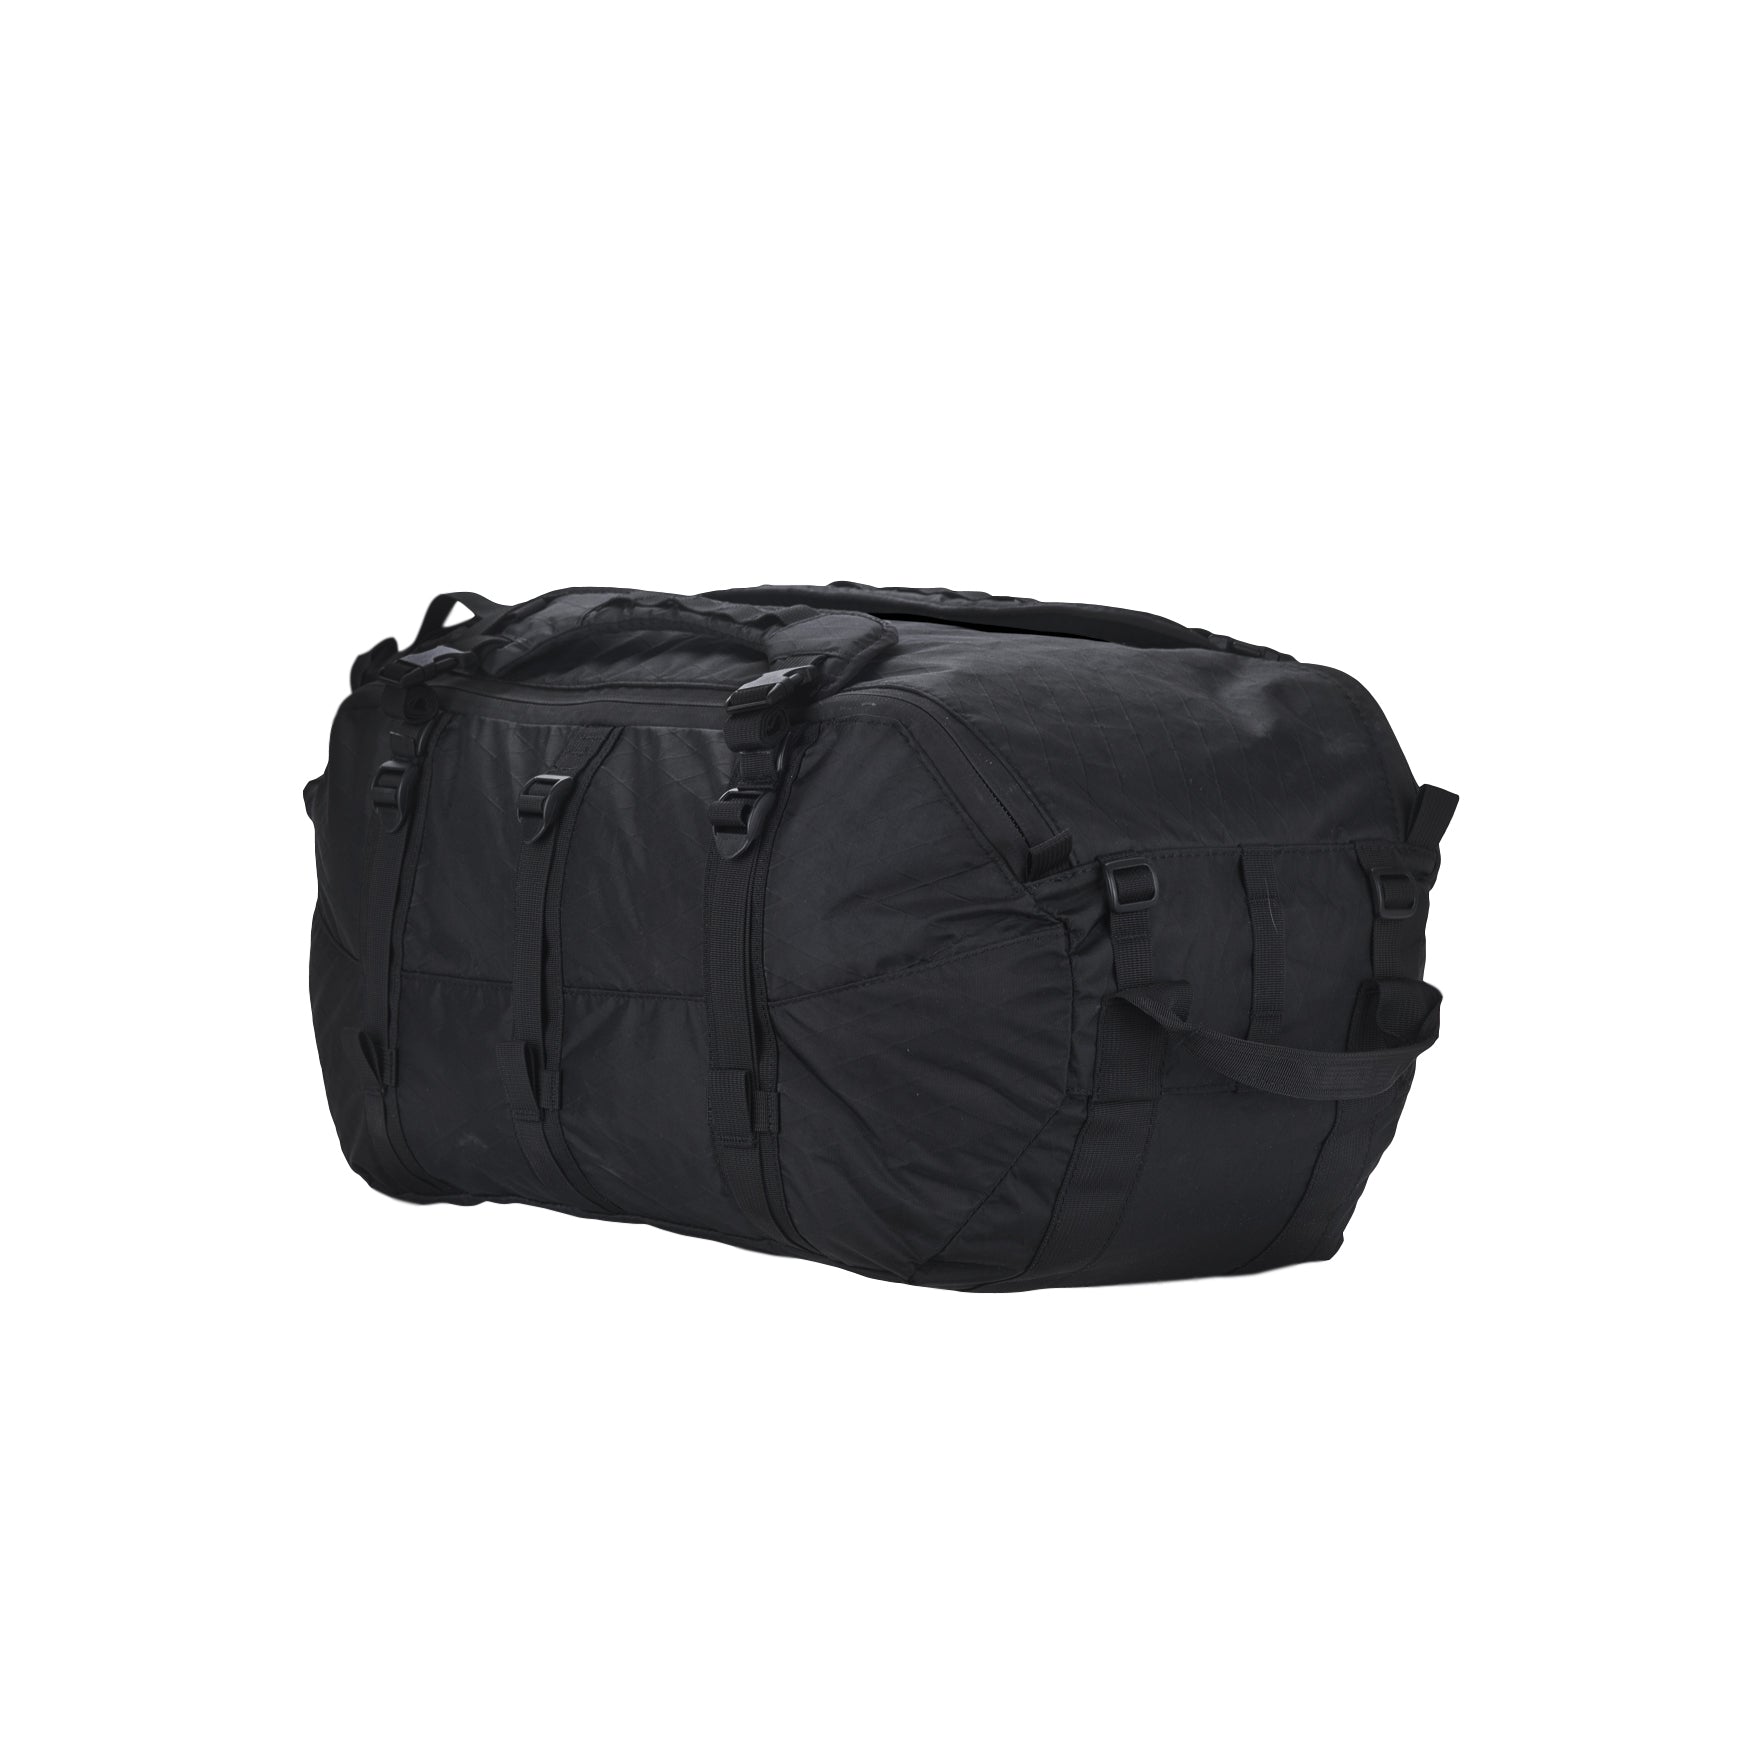 Triple Aught Design Axis Expedition Duffel